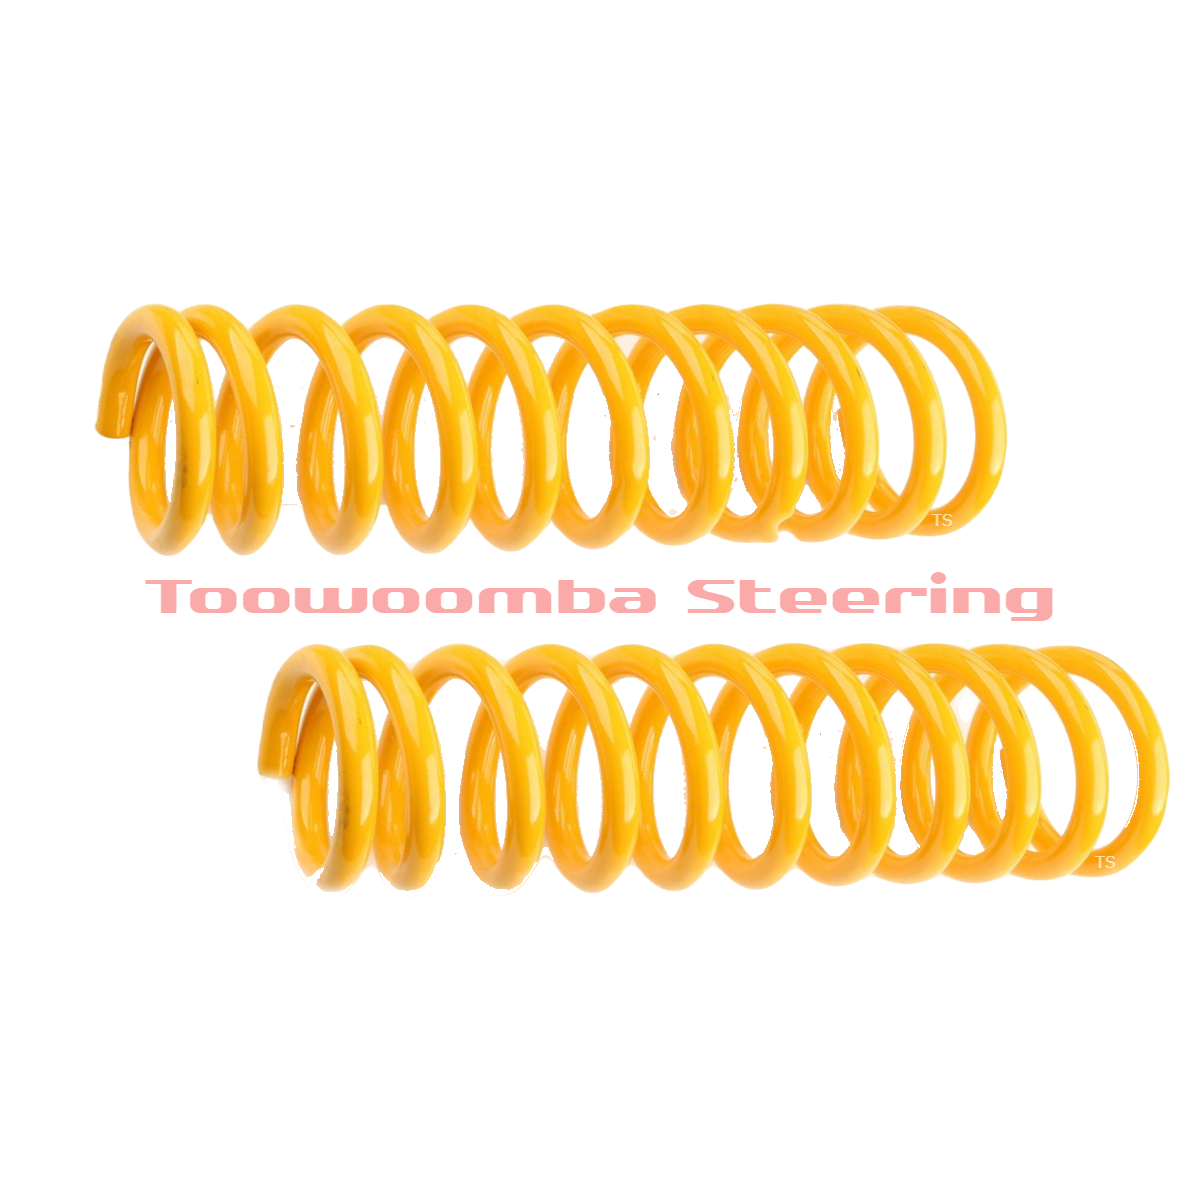 Rear Lowered King Springs  -  Ideal for -  Ford Territory SX; SY AWD 10/07 – 11, Ford Territory SX; SY AWD 04 – 9/07, Territory SZ; SZII AWD 2.7TDI 12 -16  - (KFRL-69)